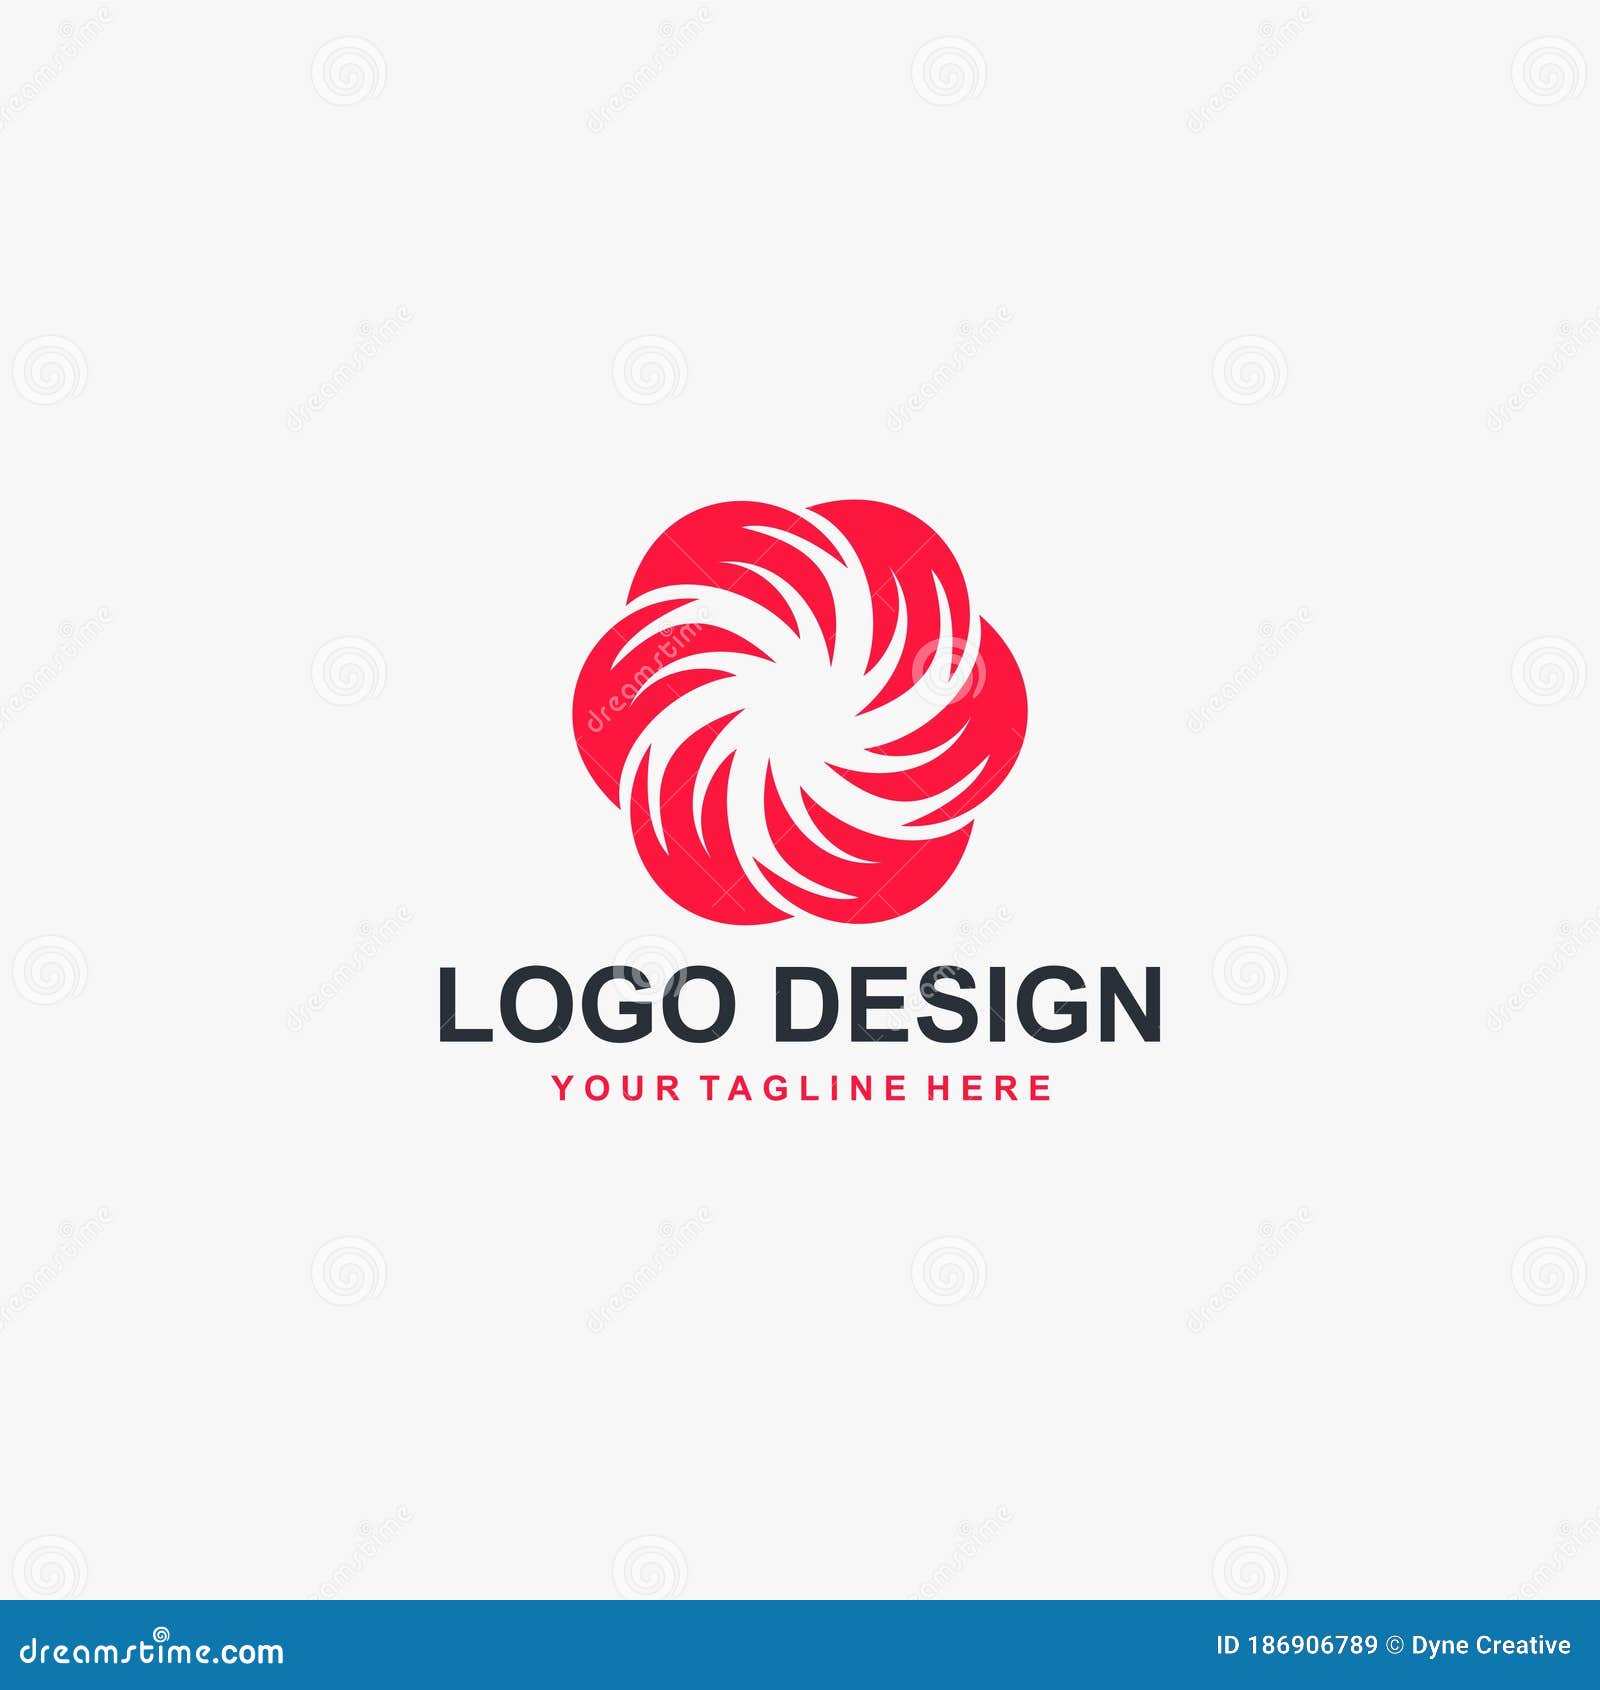 Charity Logo Design. Humanity Abstract Symbol. People Care Vector Icons ...